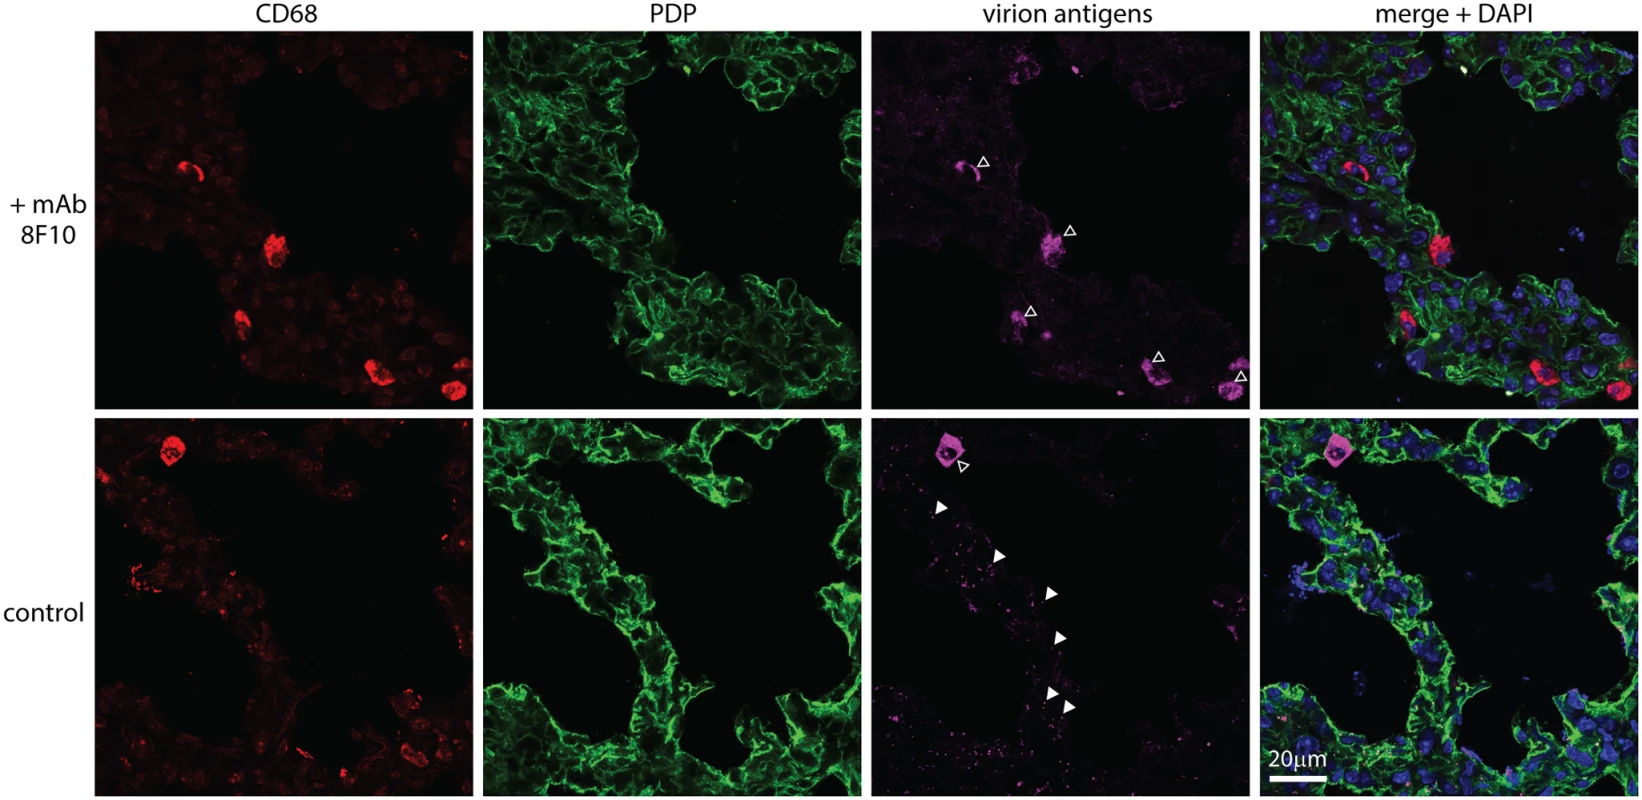 An antibody-mediated block to heparan binding inhibits MuHV-4 interaction with alveolar epithelial cells but not macrophages.